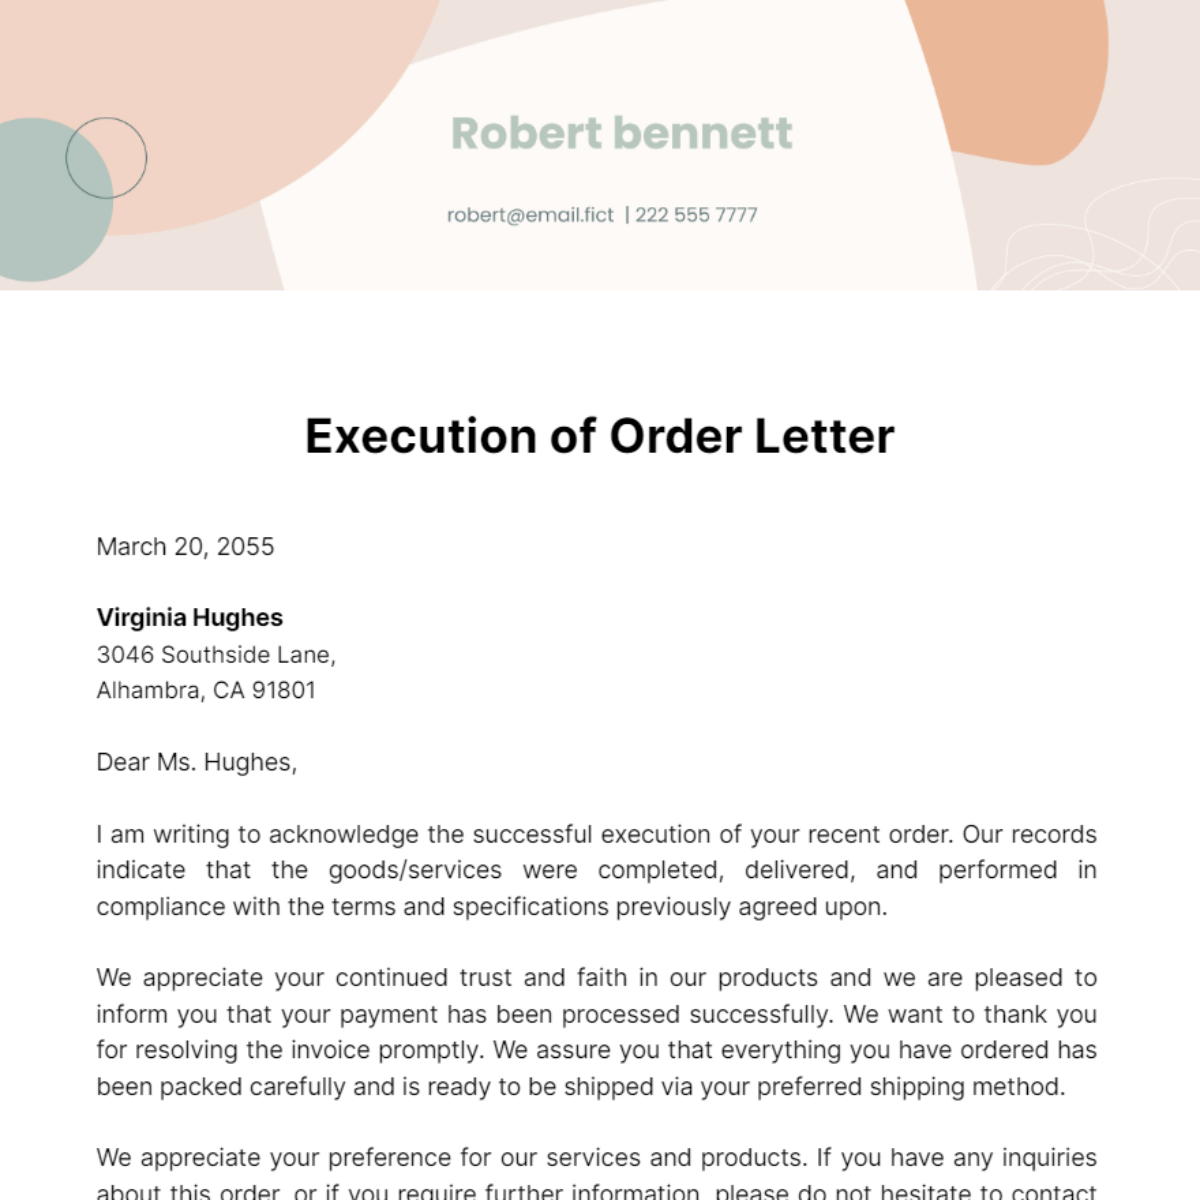 Execution of Order Letter Template